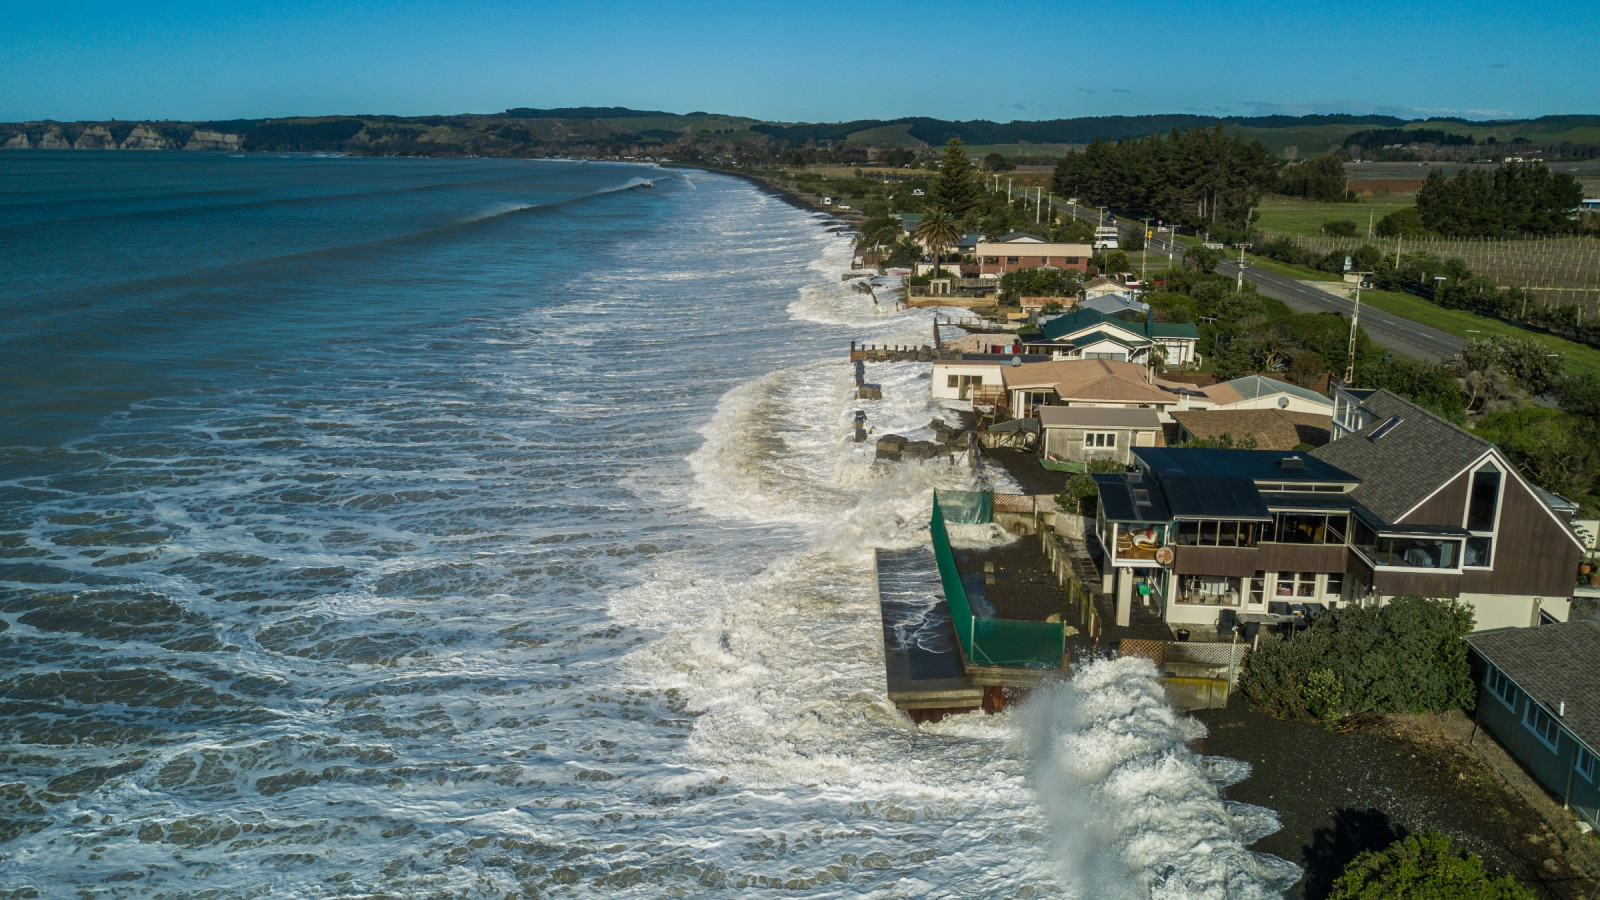 A coastline with a line of houses being breached and flooded by the ocean.